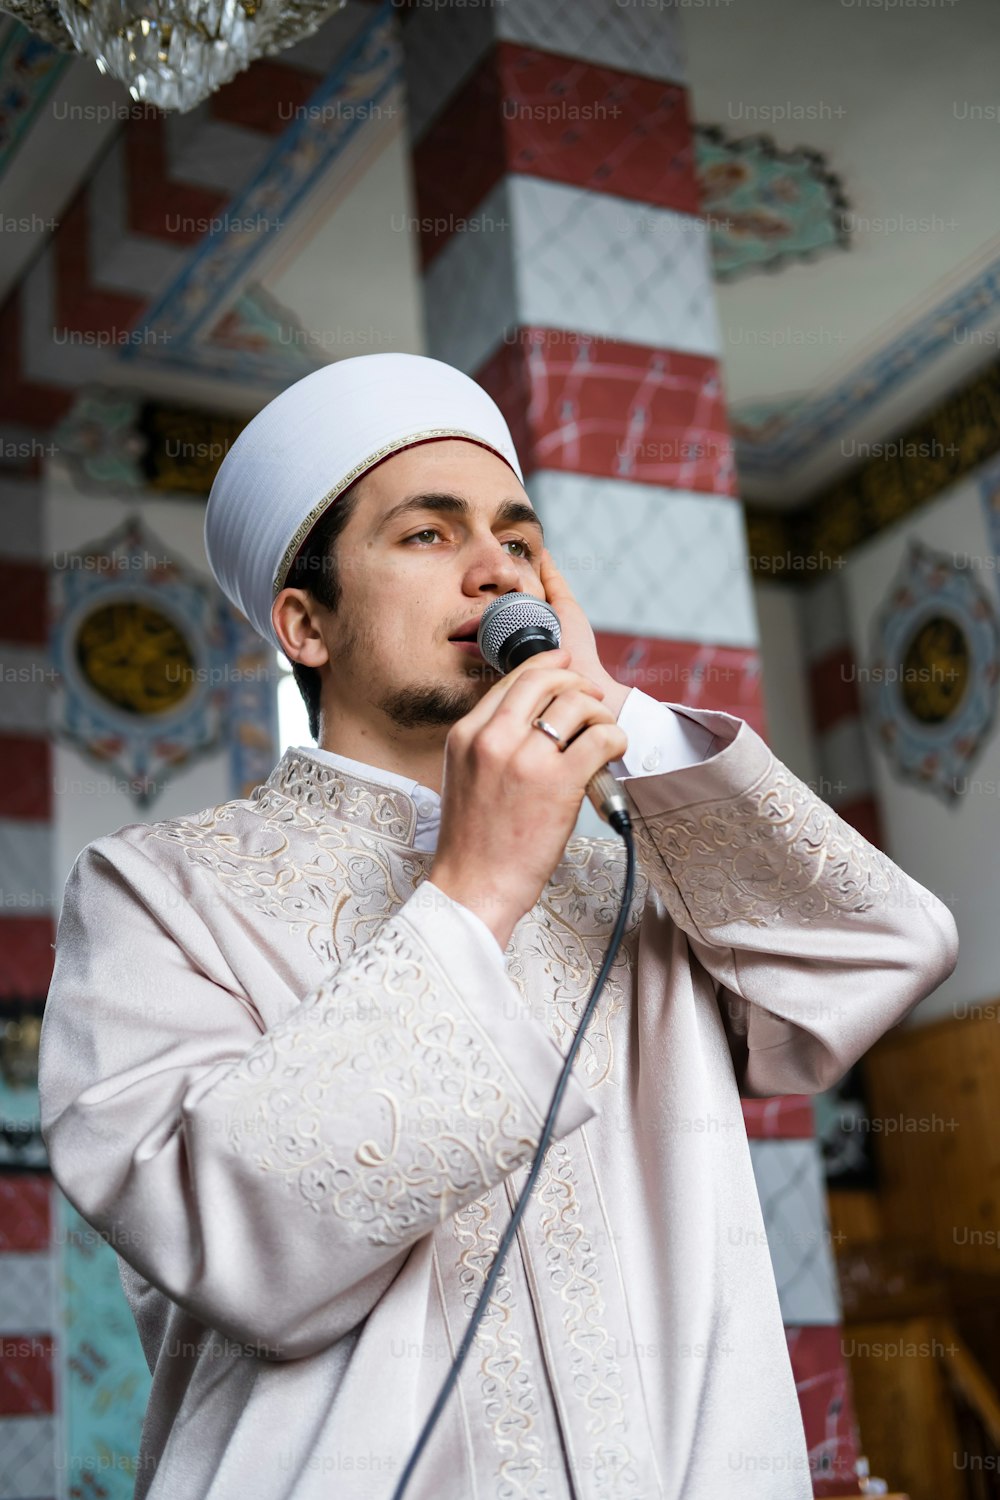 a man in a white outfit singing into a microphone